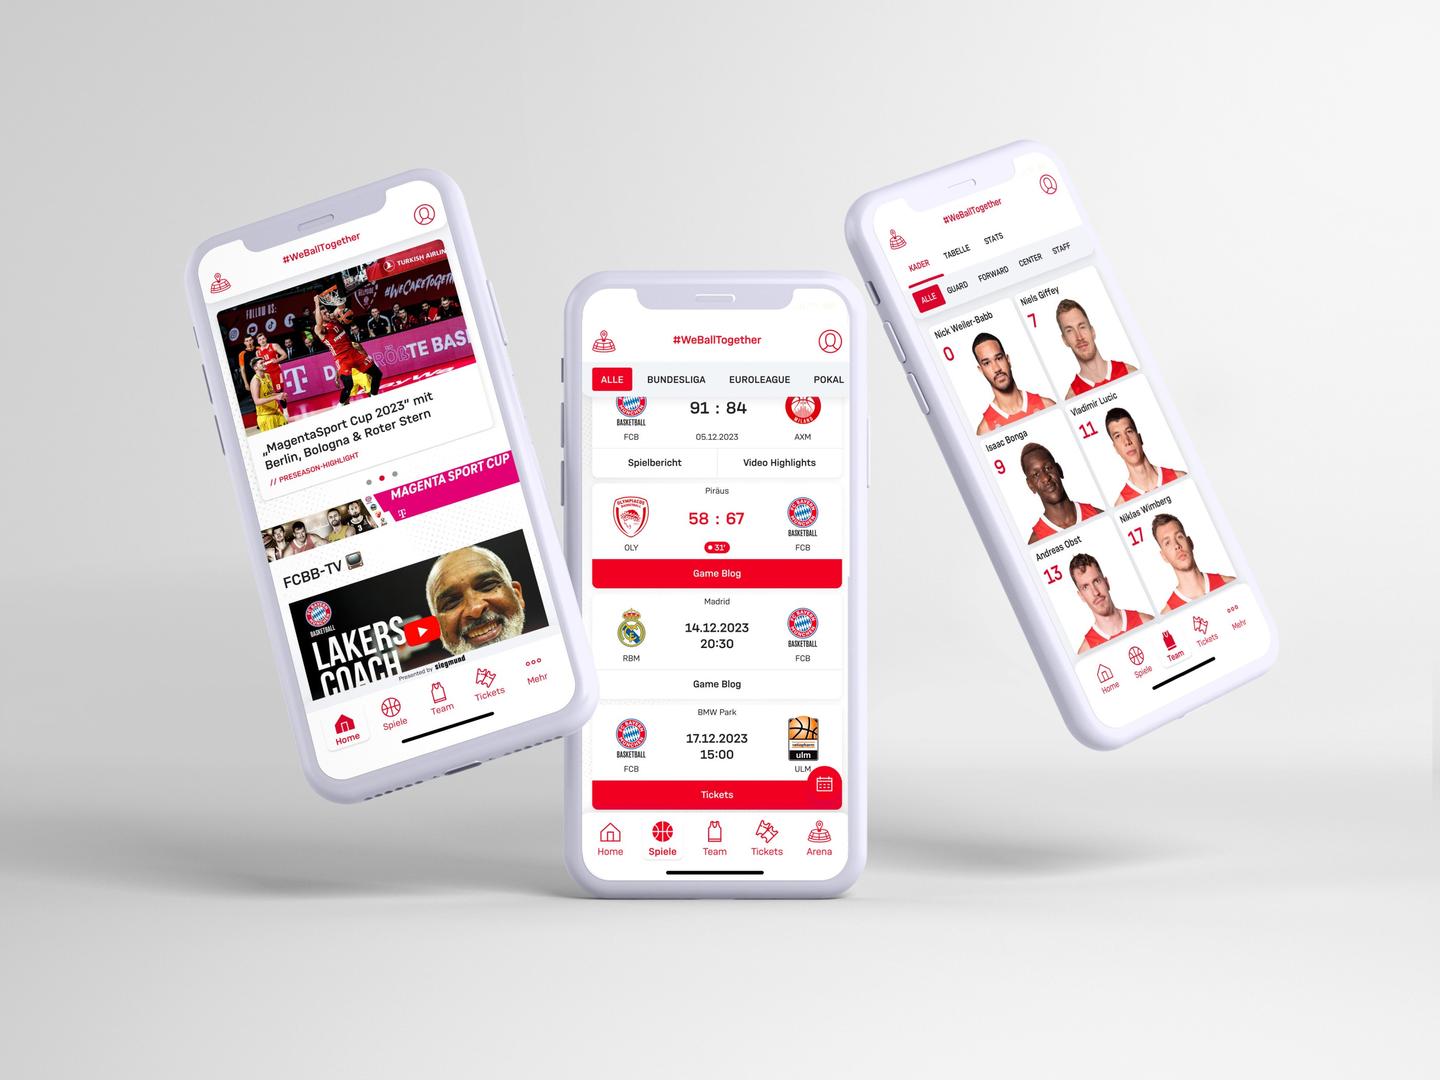 Shows 3 mobile phones with different screens and features from the FCBB fan app 